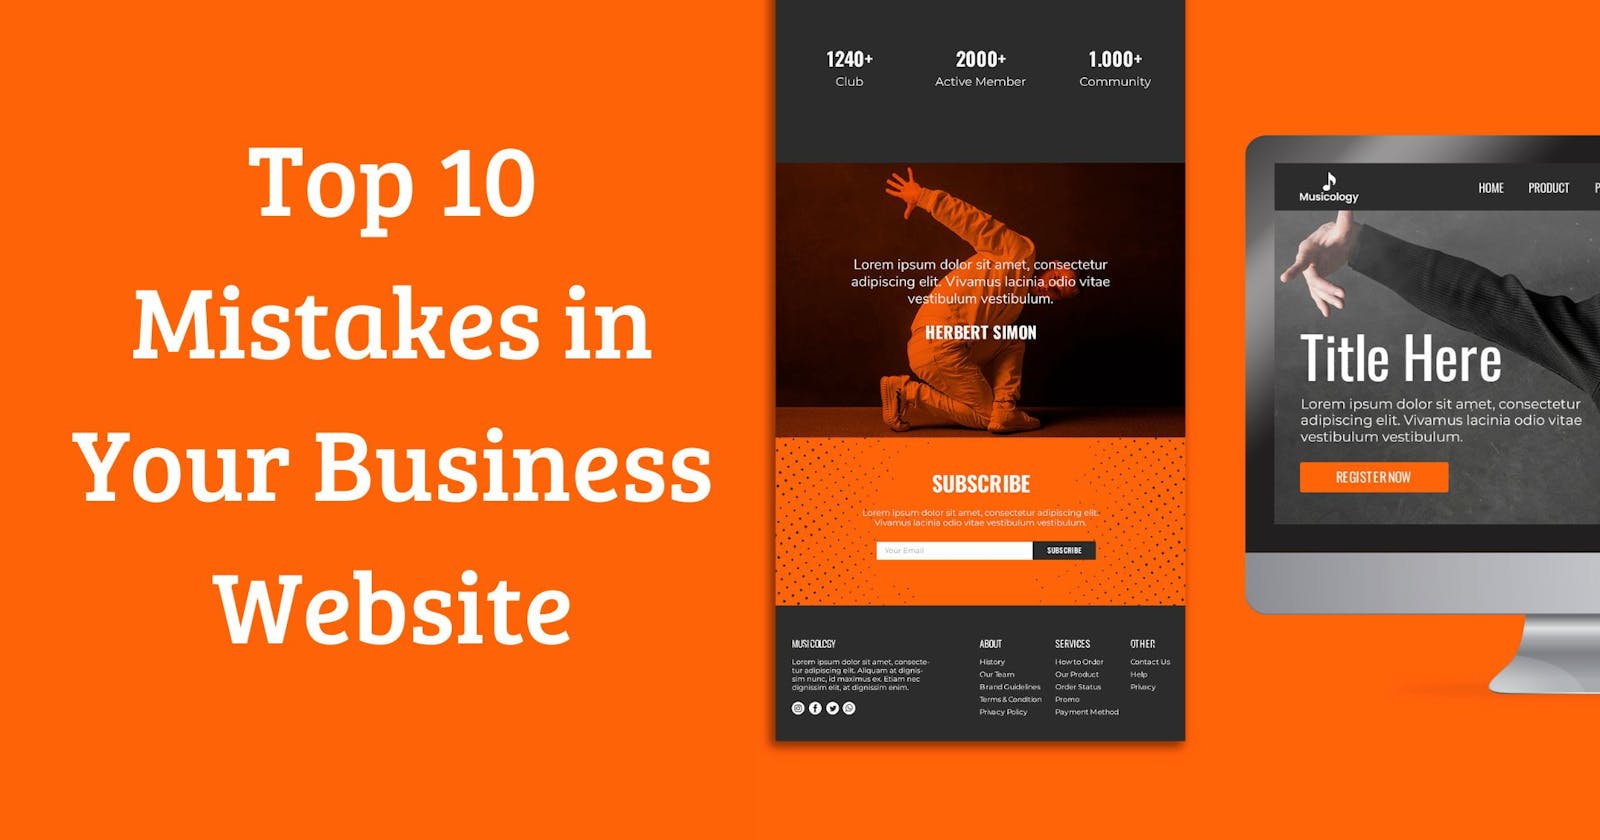 Top 10 Mistakes to Avoid on Your Business Website